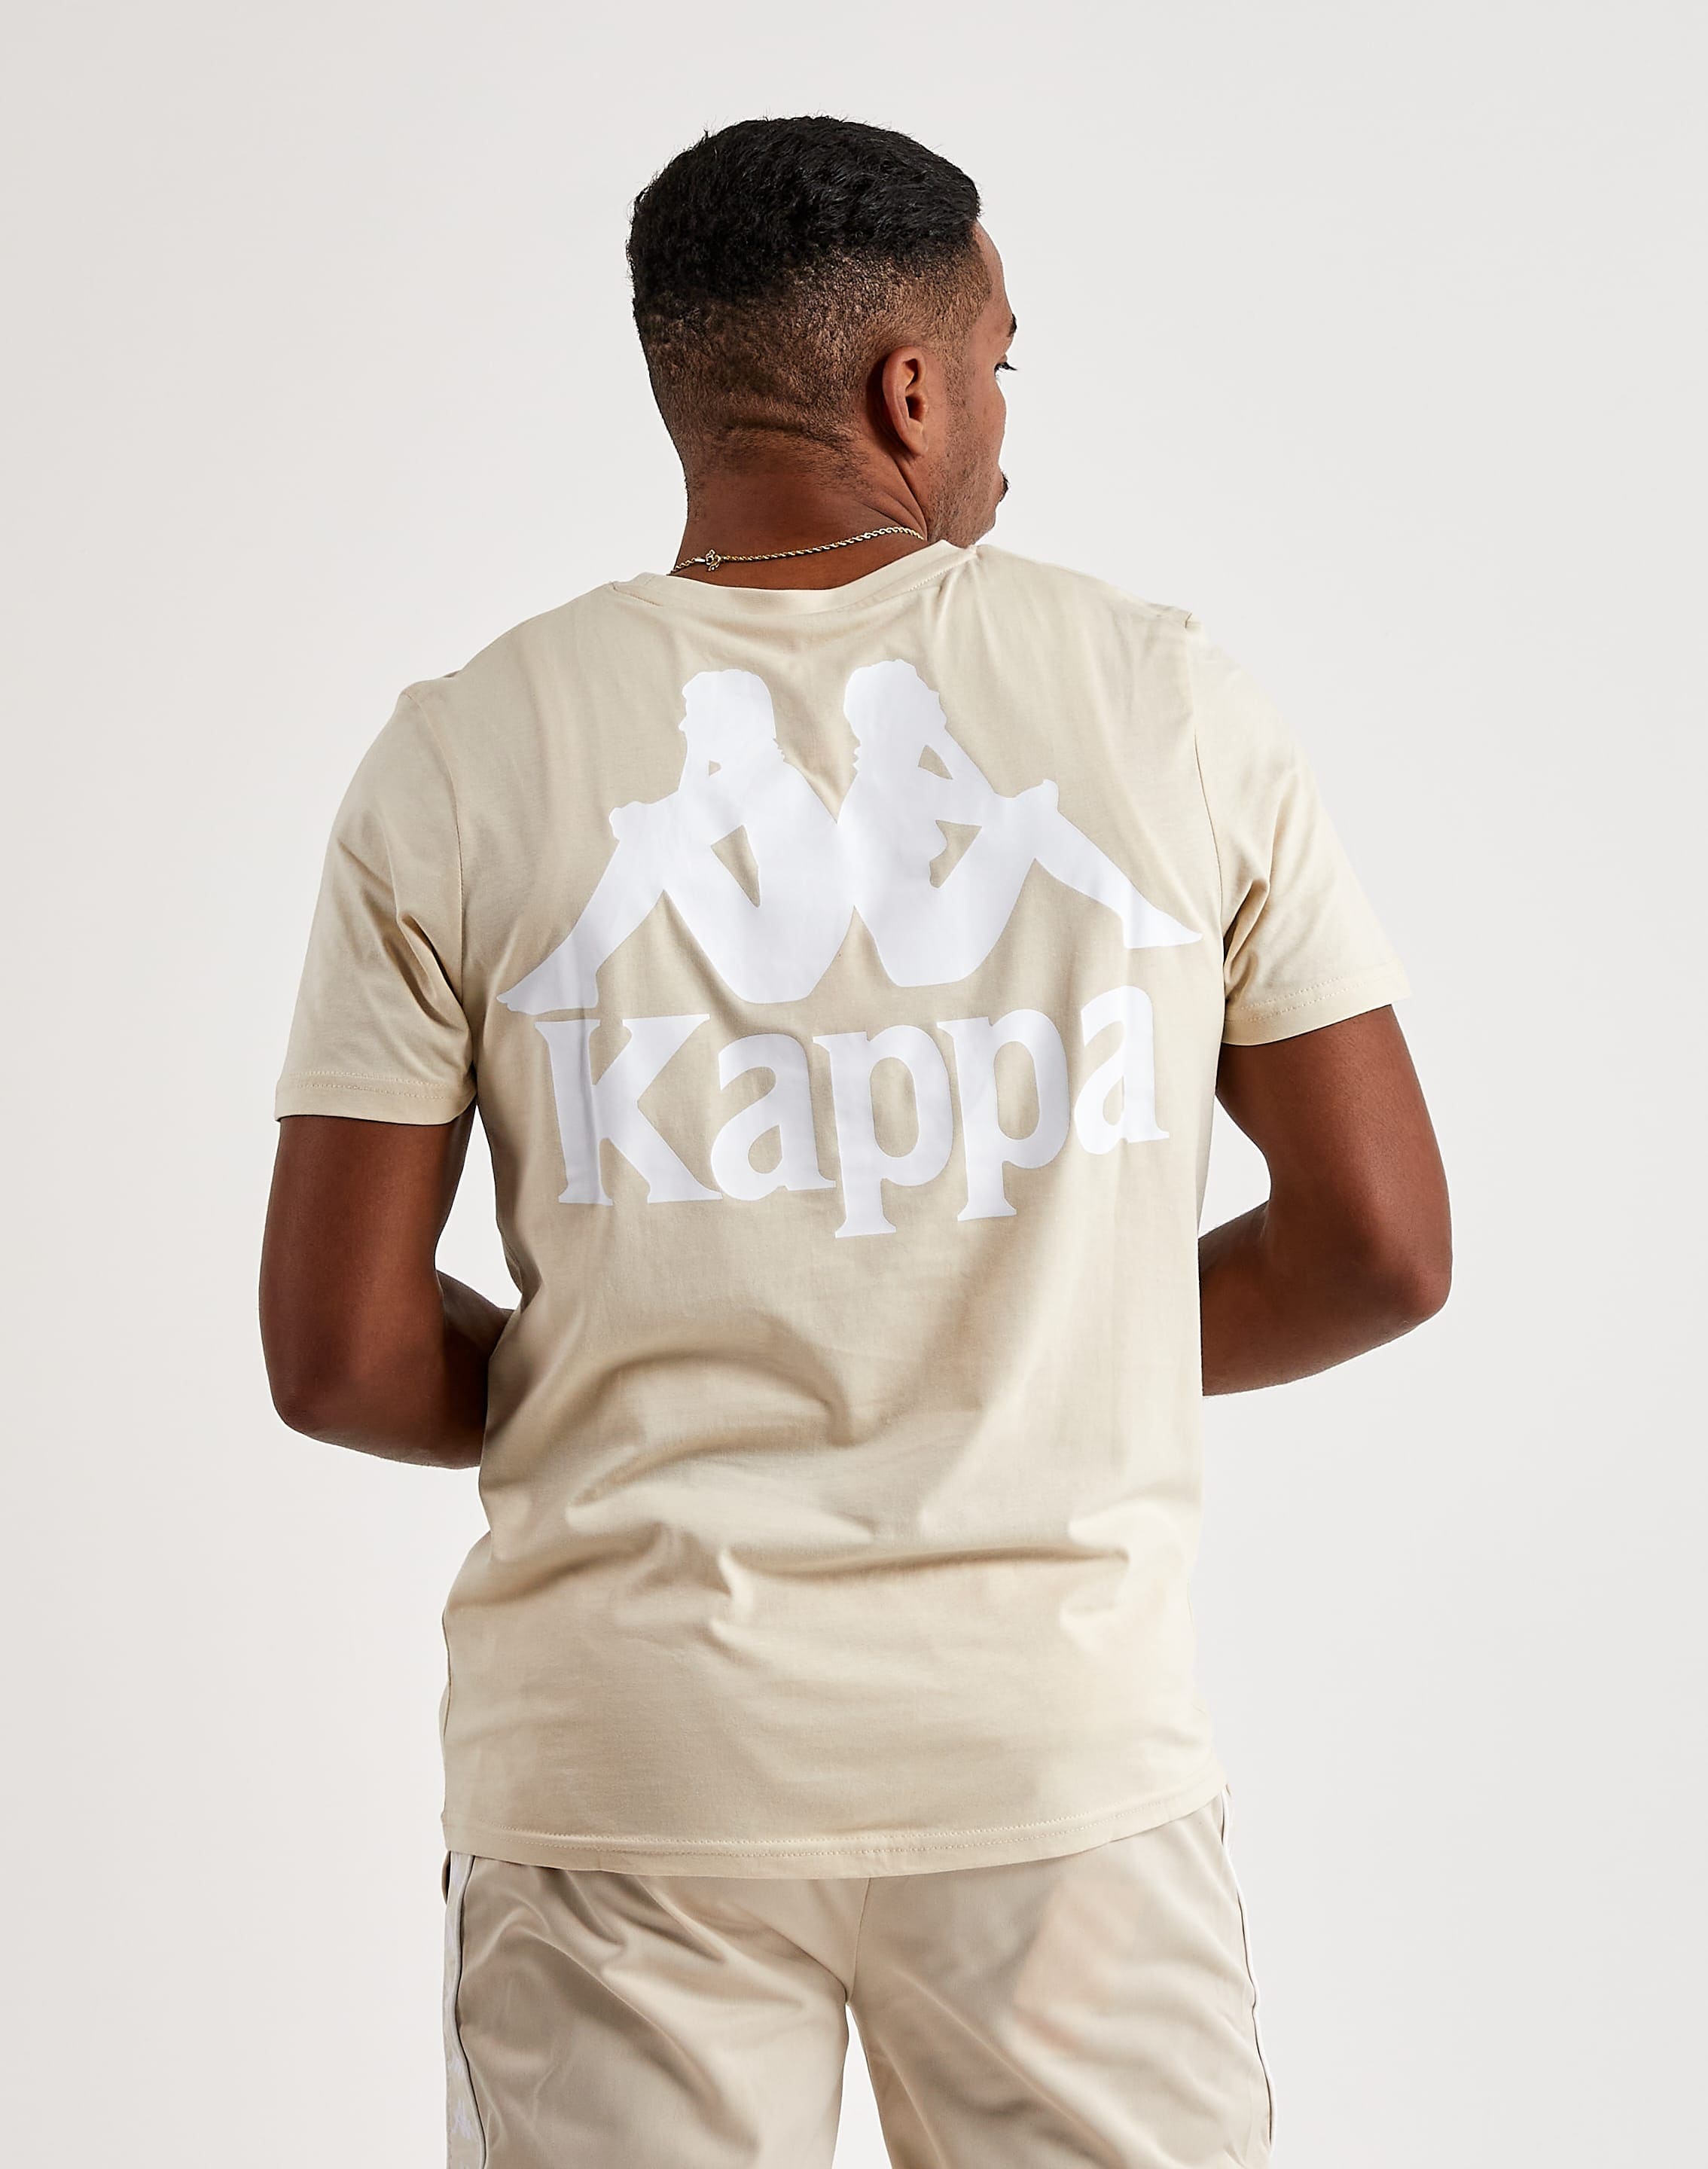 Kappa Authentic Ables Tee – DTLR